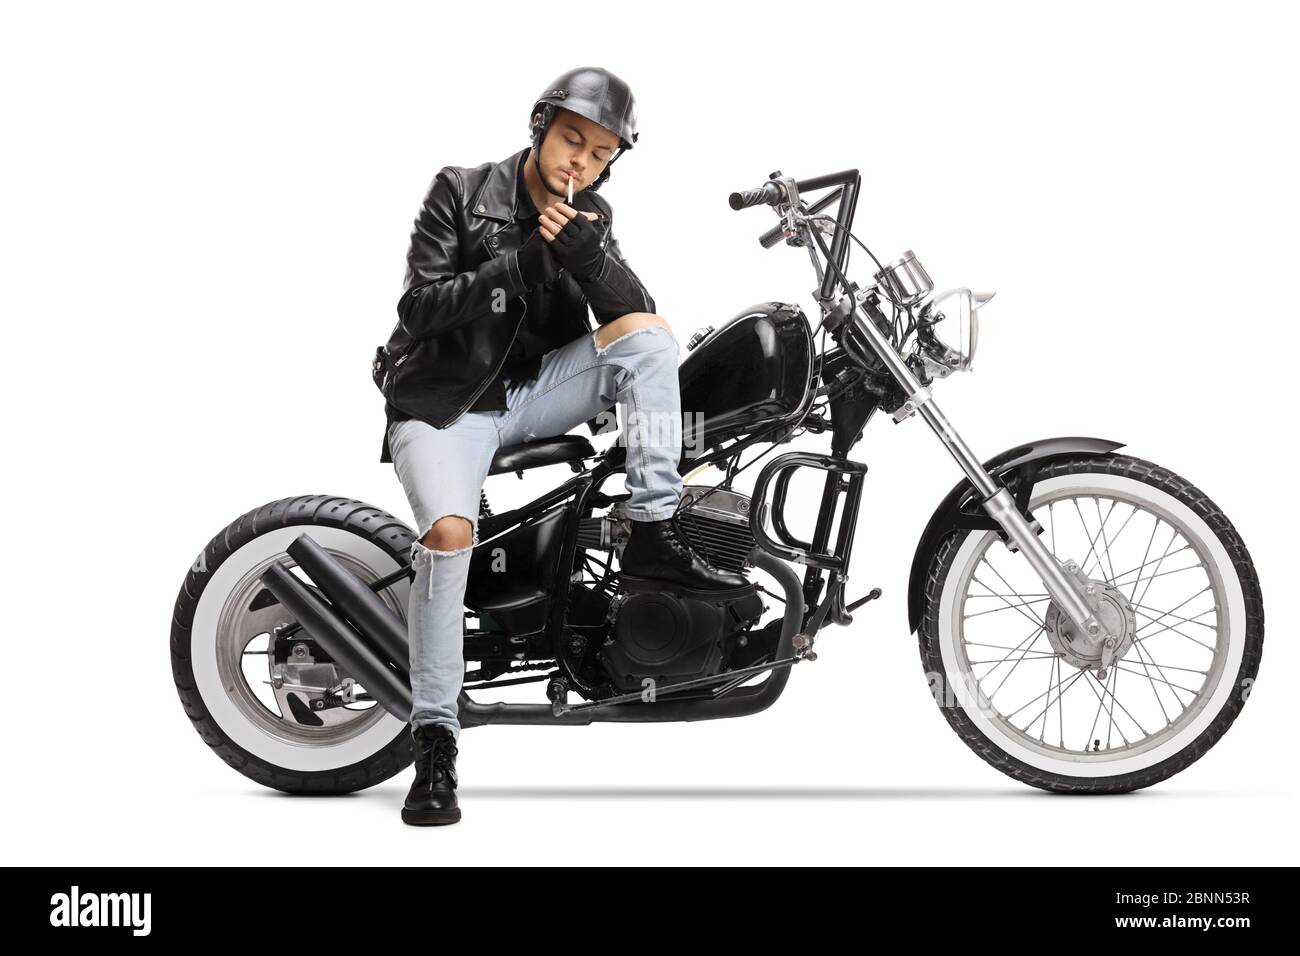 Young biker with a helmet and a leather jacket sitting on a chopper motorbike and lighting a cigarette isolated on white background Stock Photo